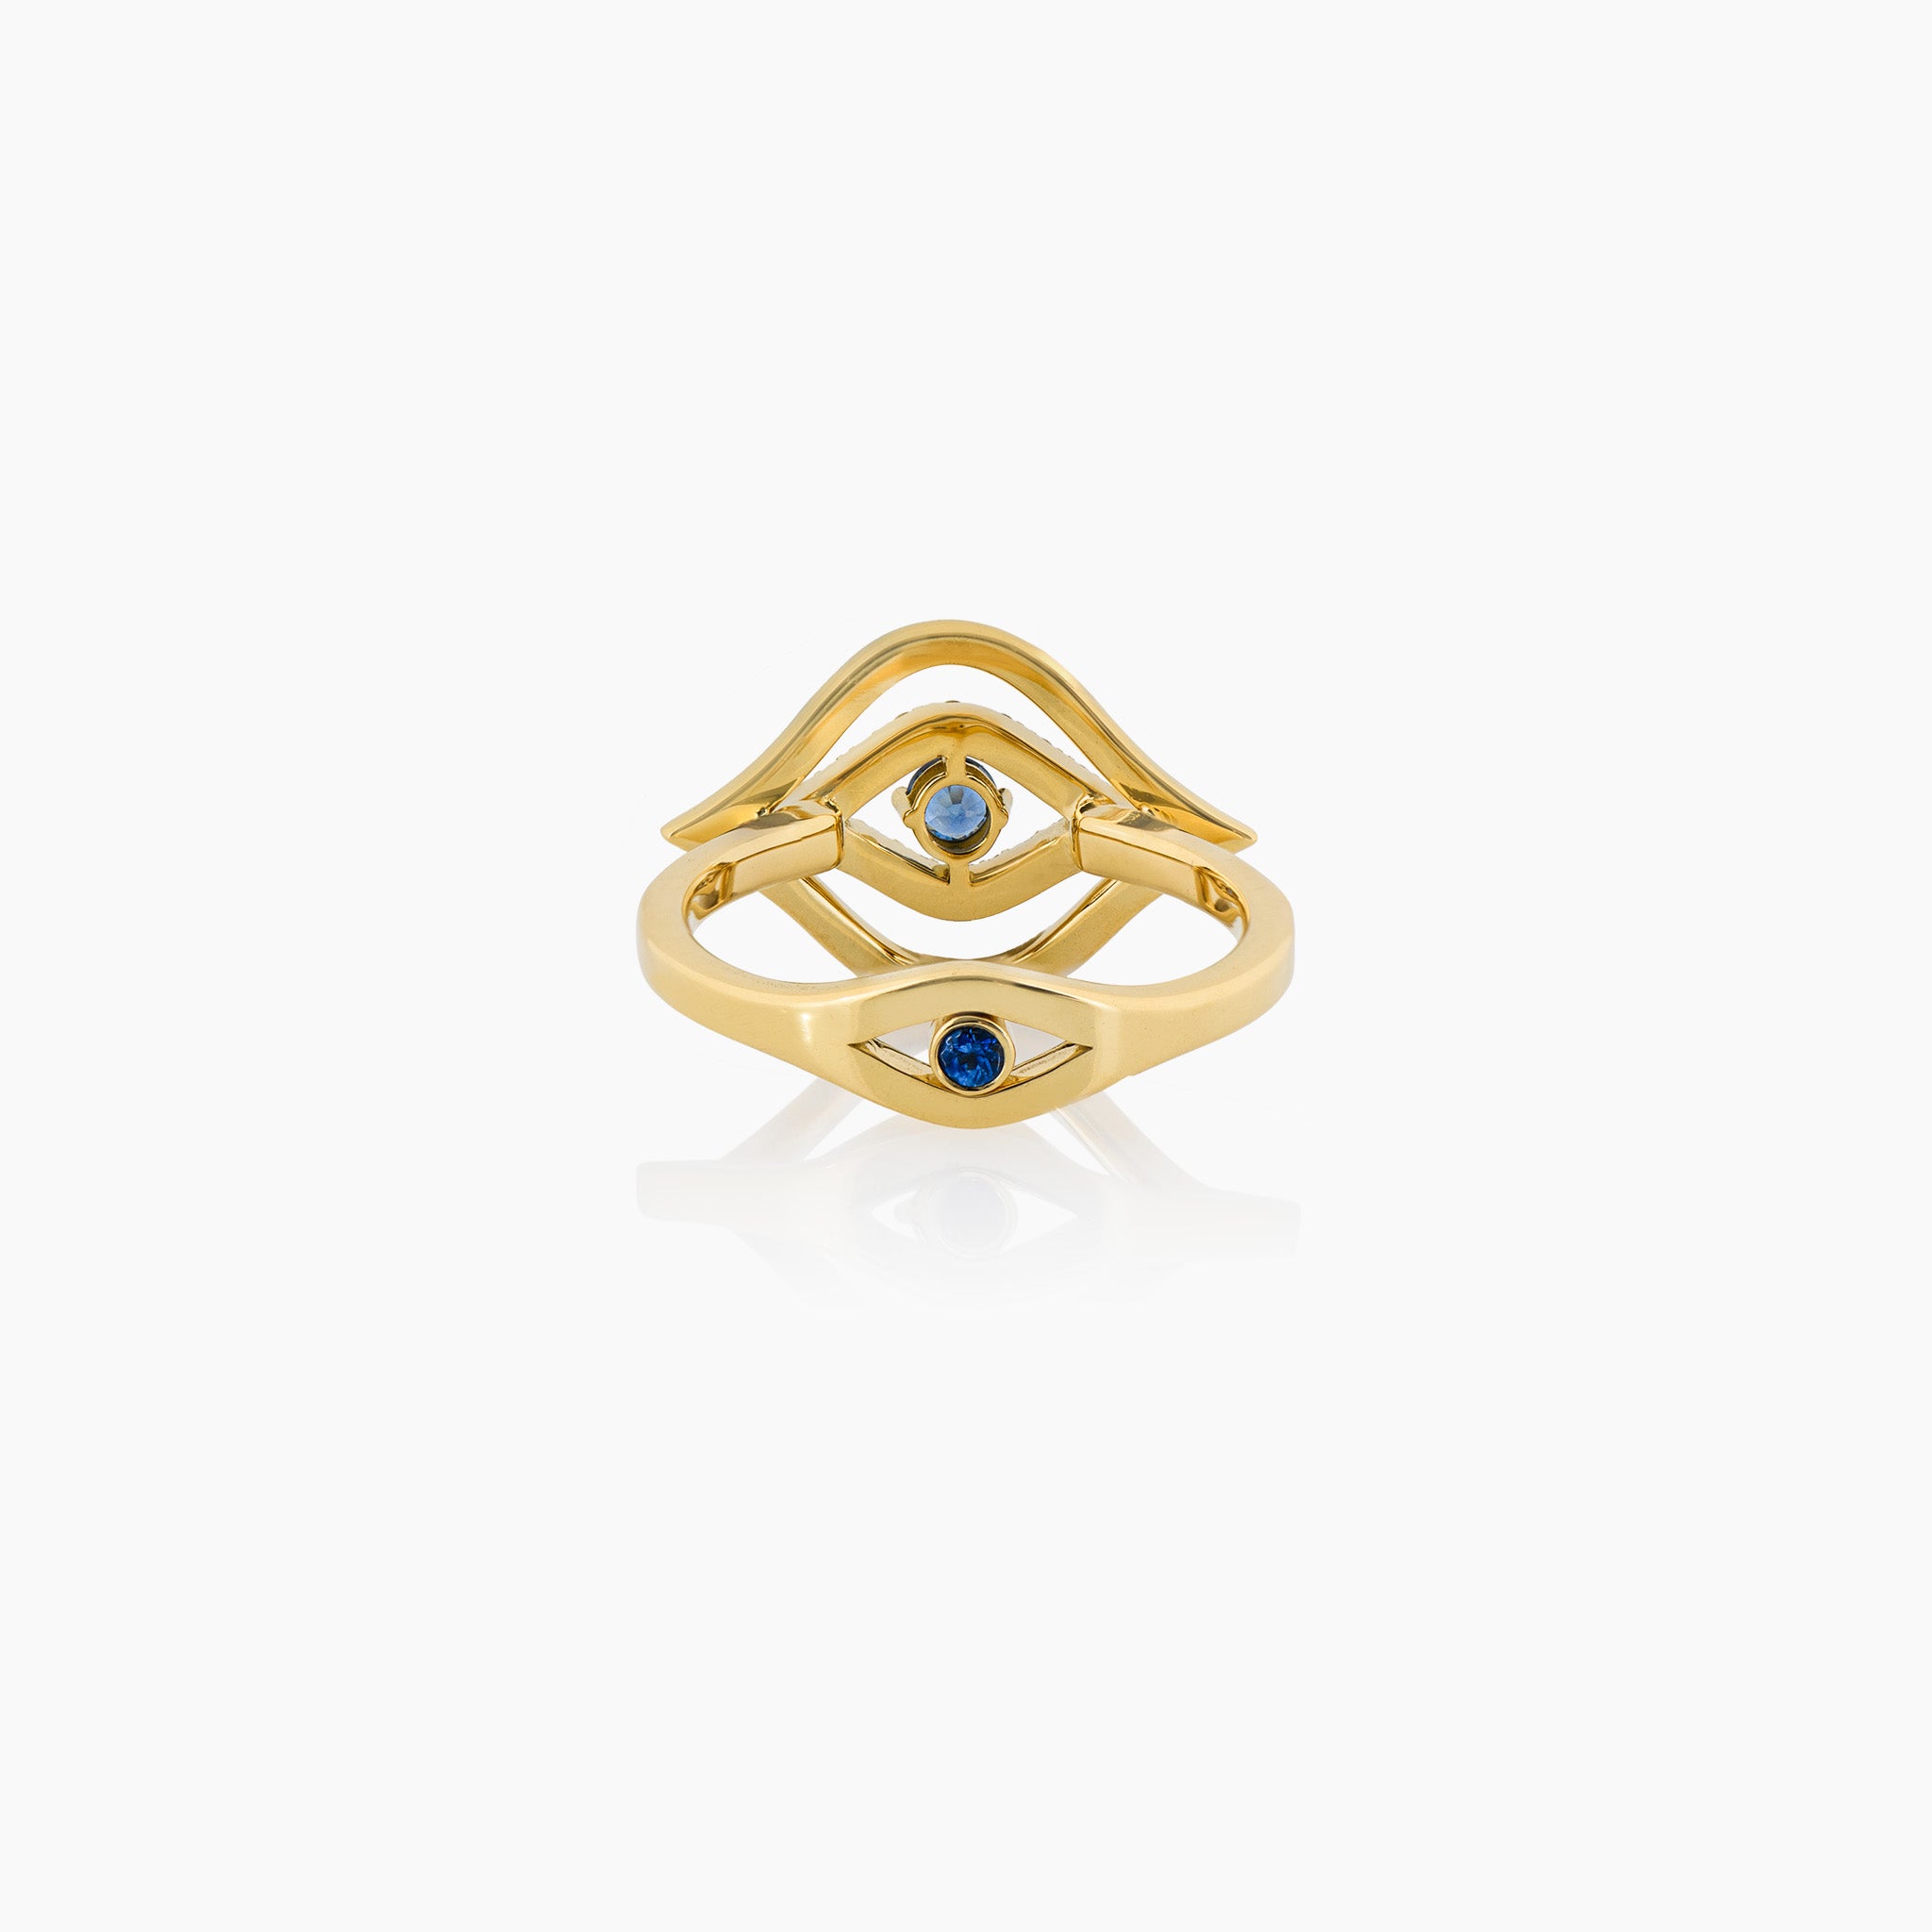 A stunning diamond and sapphire ring, presented on an off-white background.